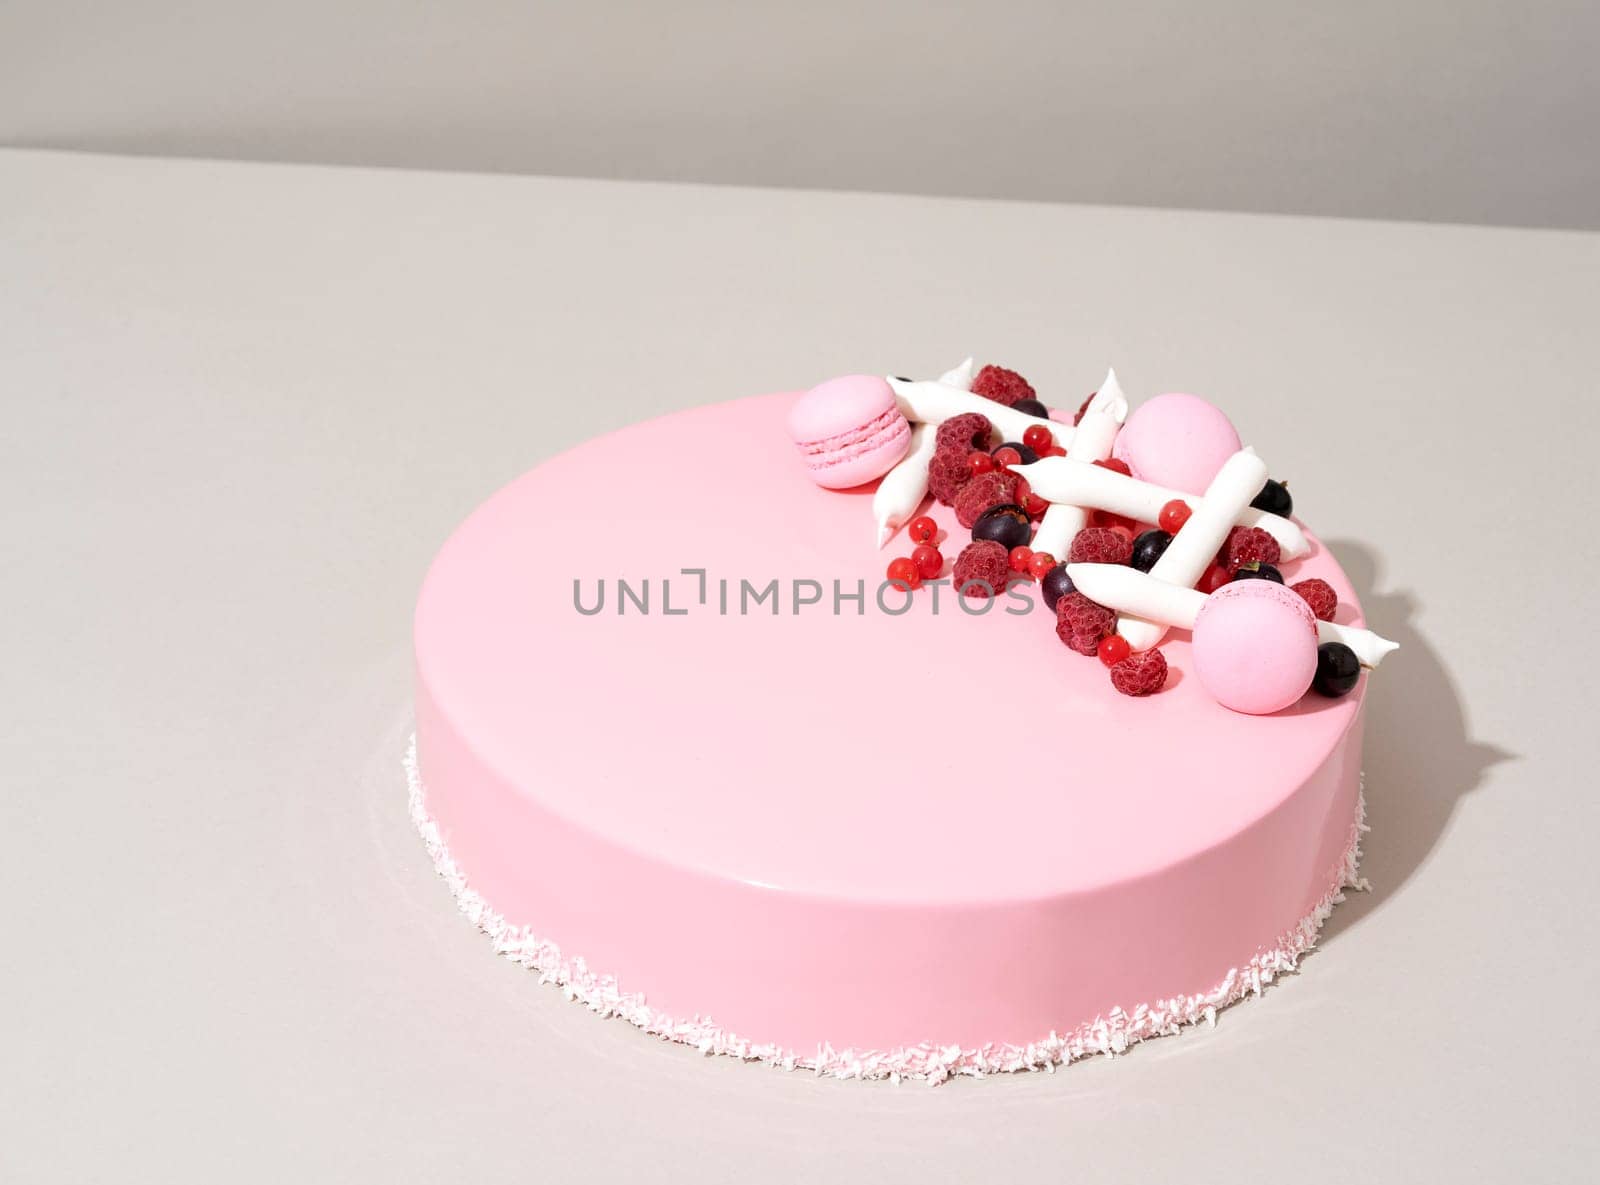 An appetizing pink cake with white strawberries adorning the top sits invitingly on a table